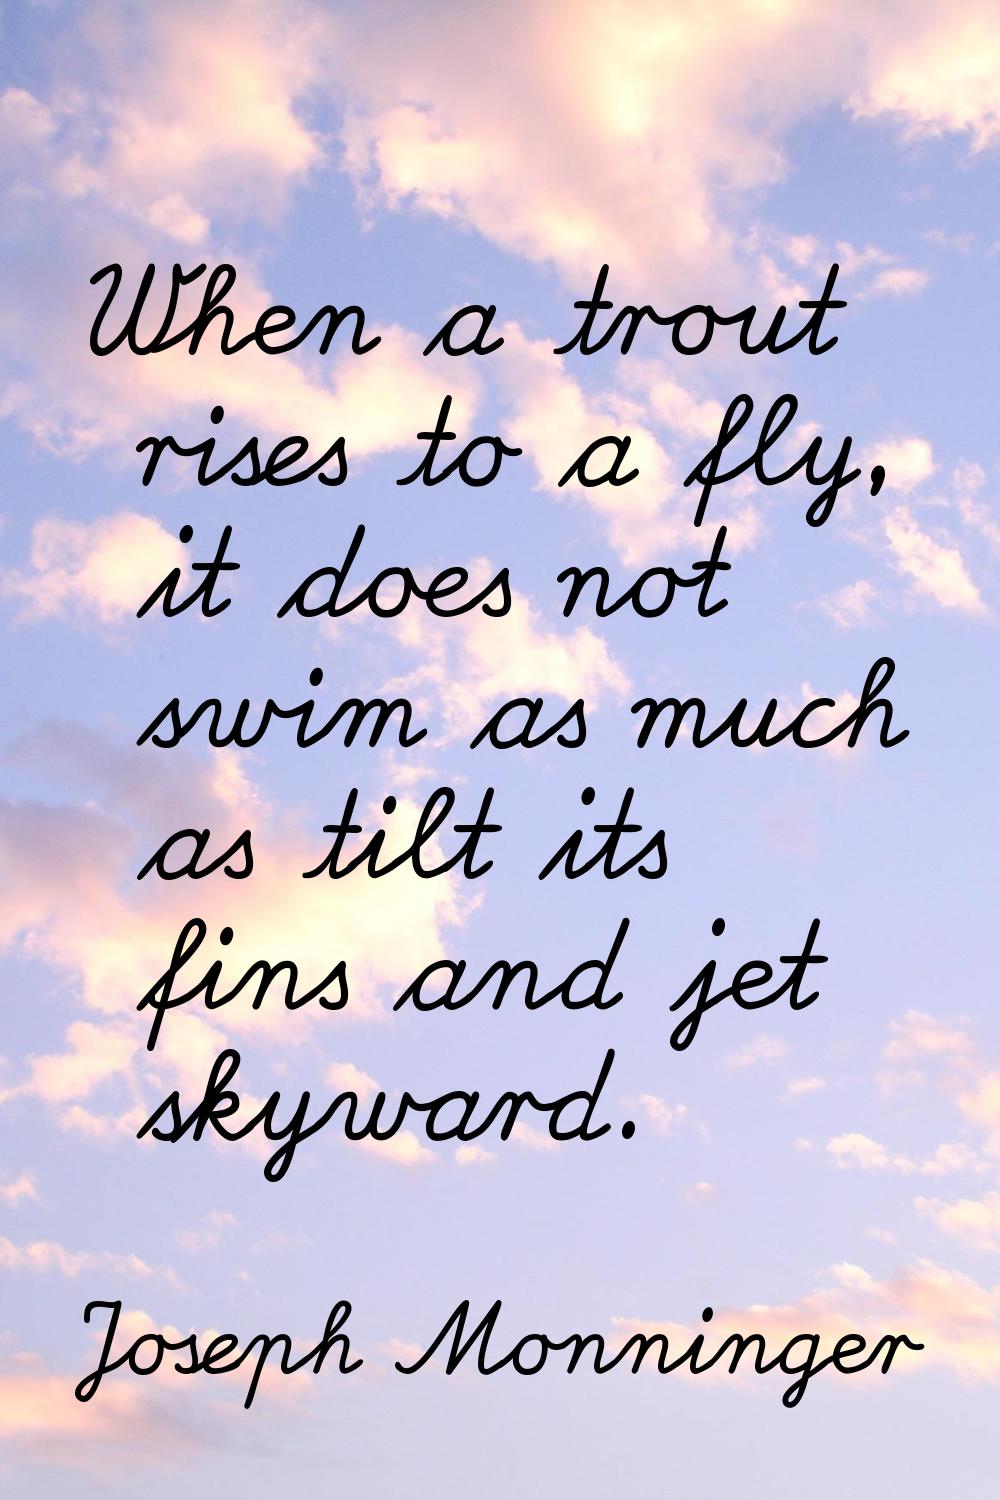 When a trout rises to a fly, it does not swim as much as tilt its fins and jet skyward.